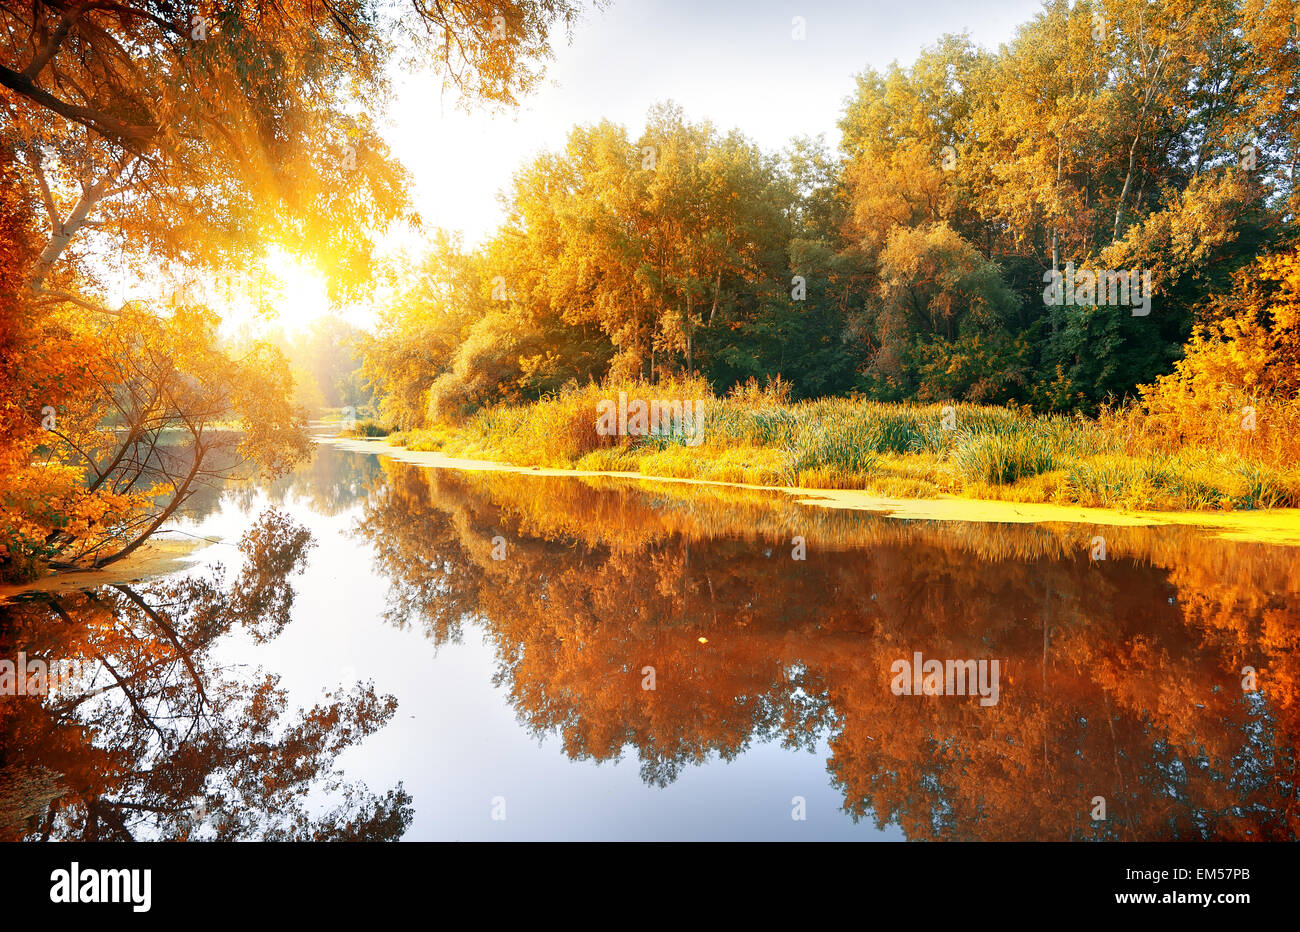 River in a delightful autumn forest Stock Photo